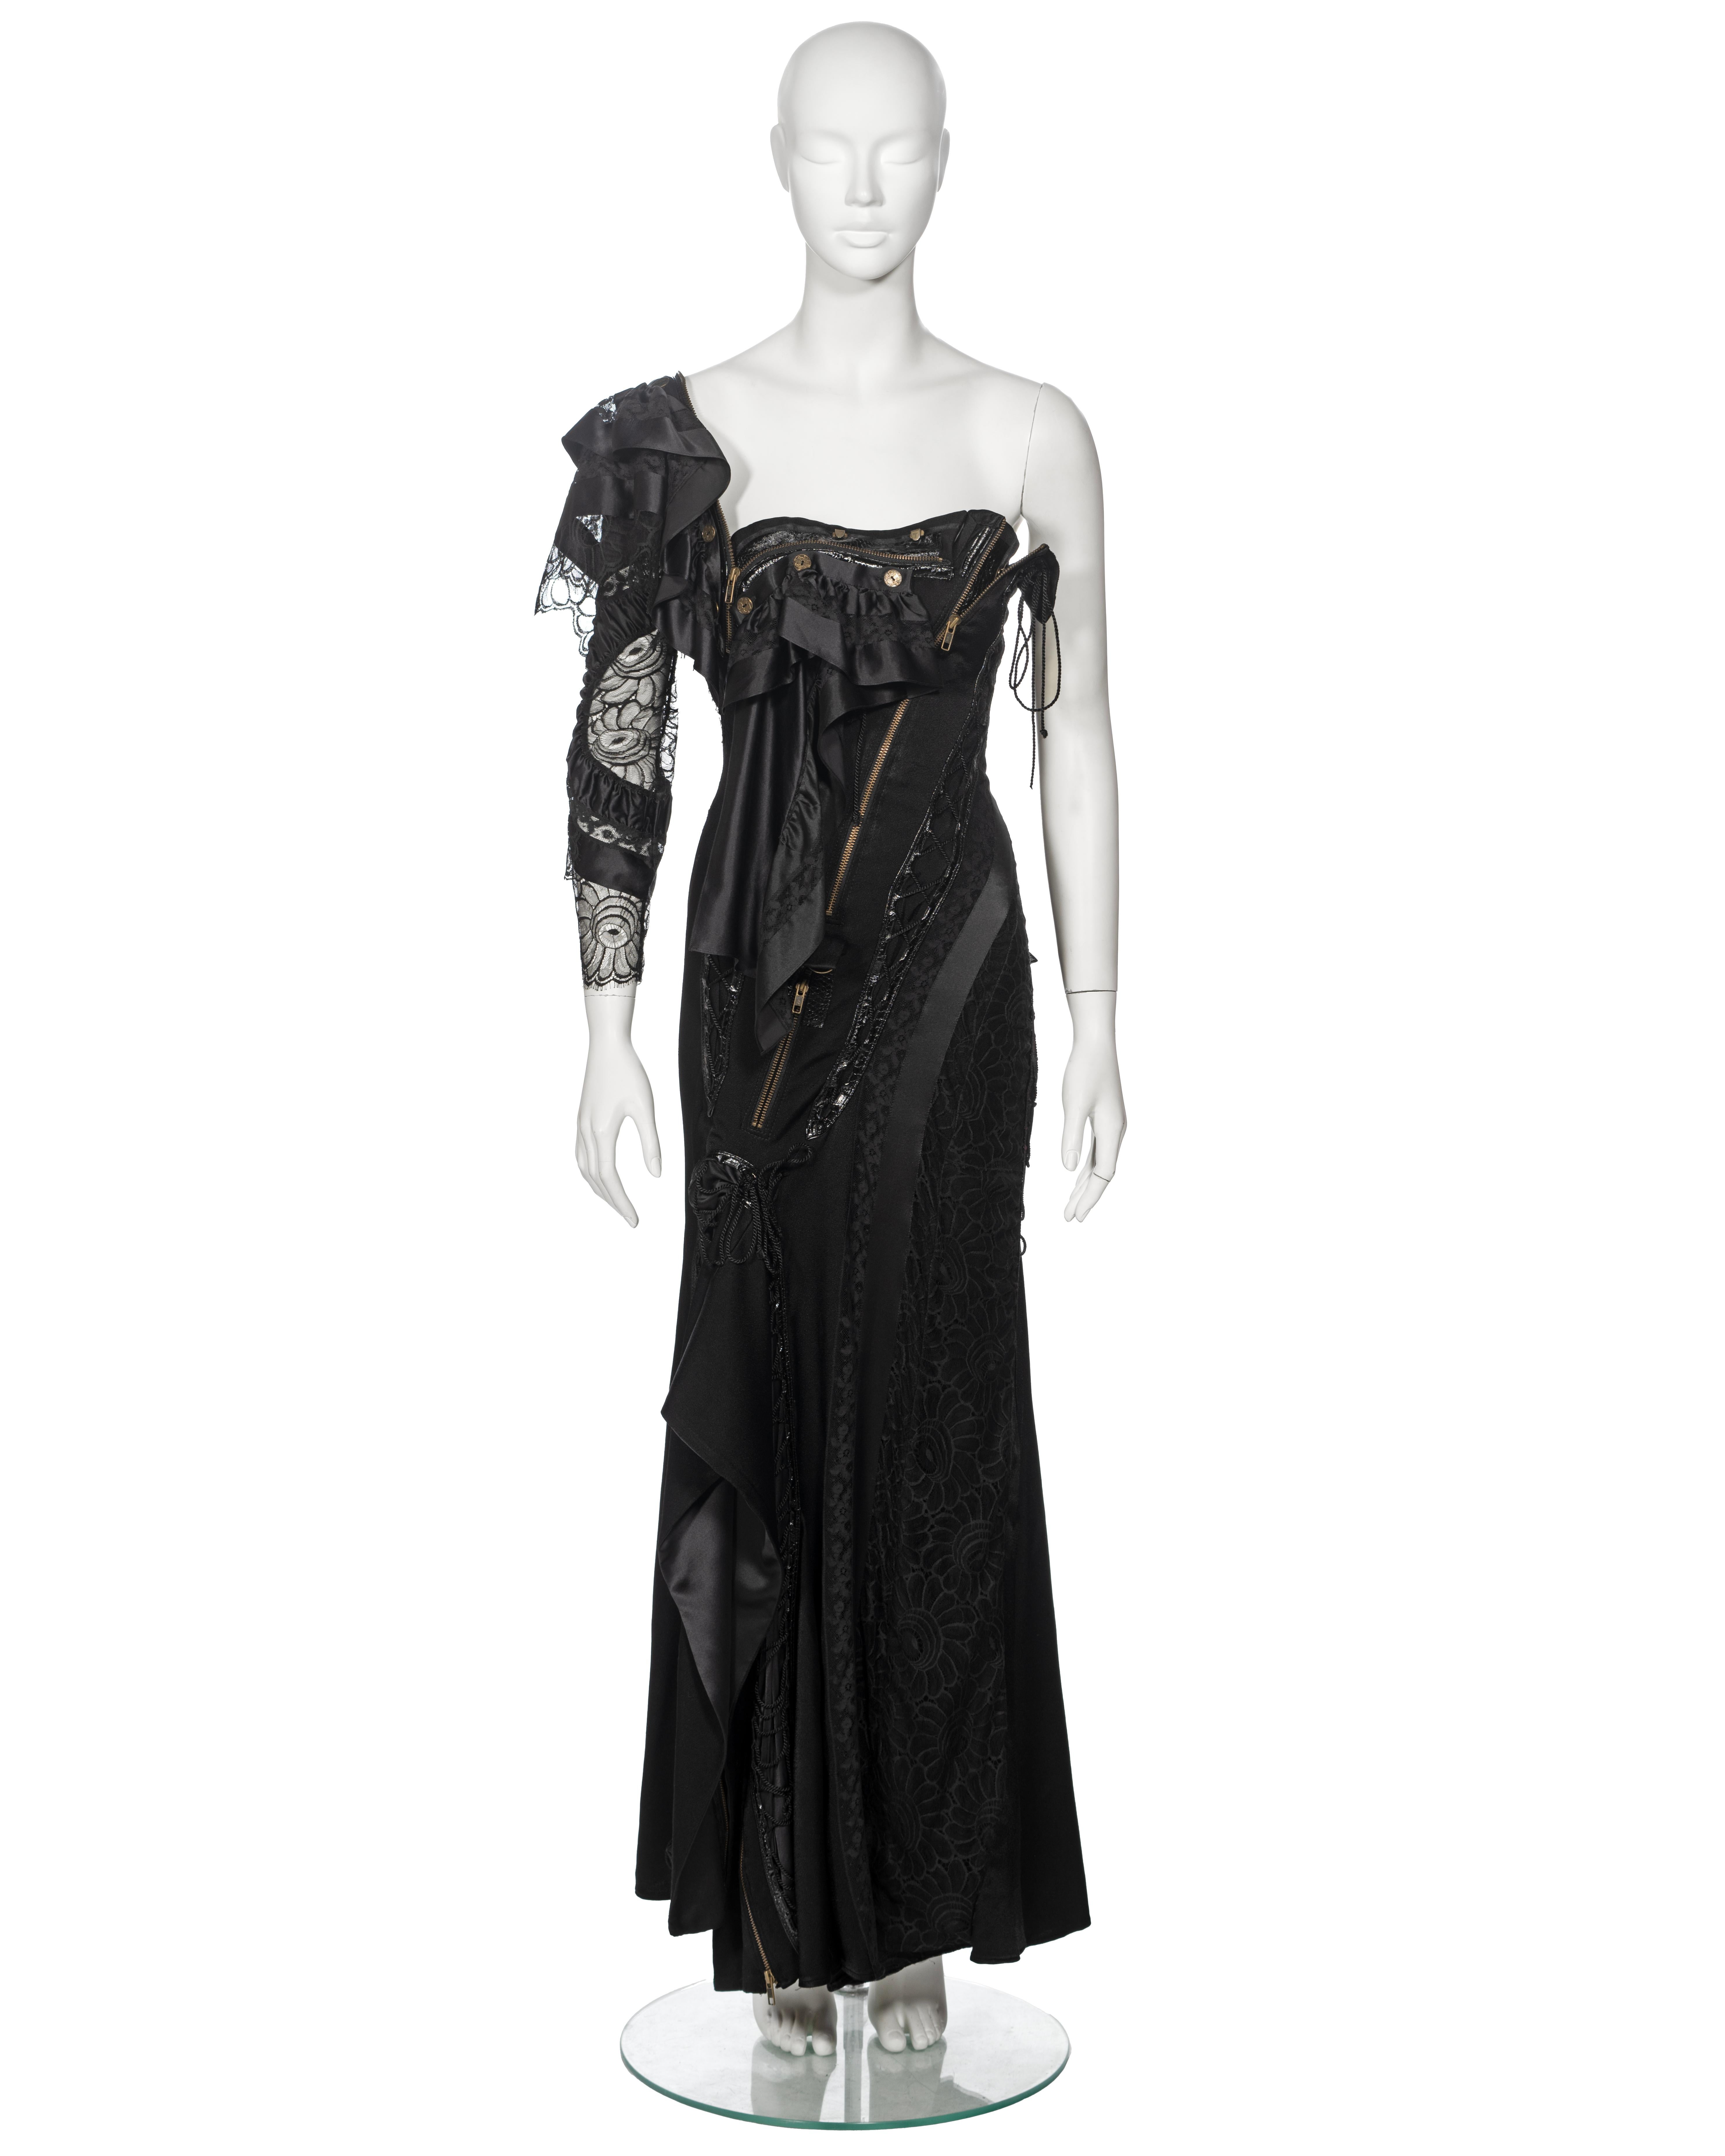 ▪ Archival Runway John Galliano Evening Dress
▪ Creative Director: John Galliano 
▪ Spring-Summer 2002
▪ Museum Grade
▪ Crafted from an array of fabrics including lace, silk, crepe, and croc-embossed leather, lending the dress a striking